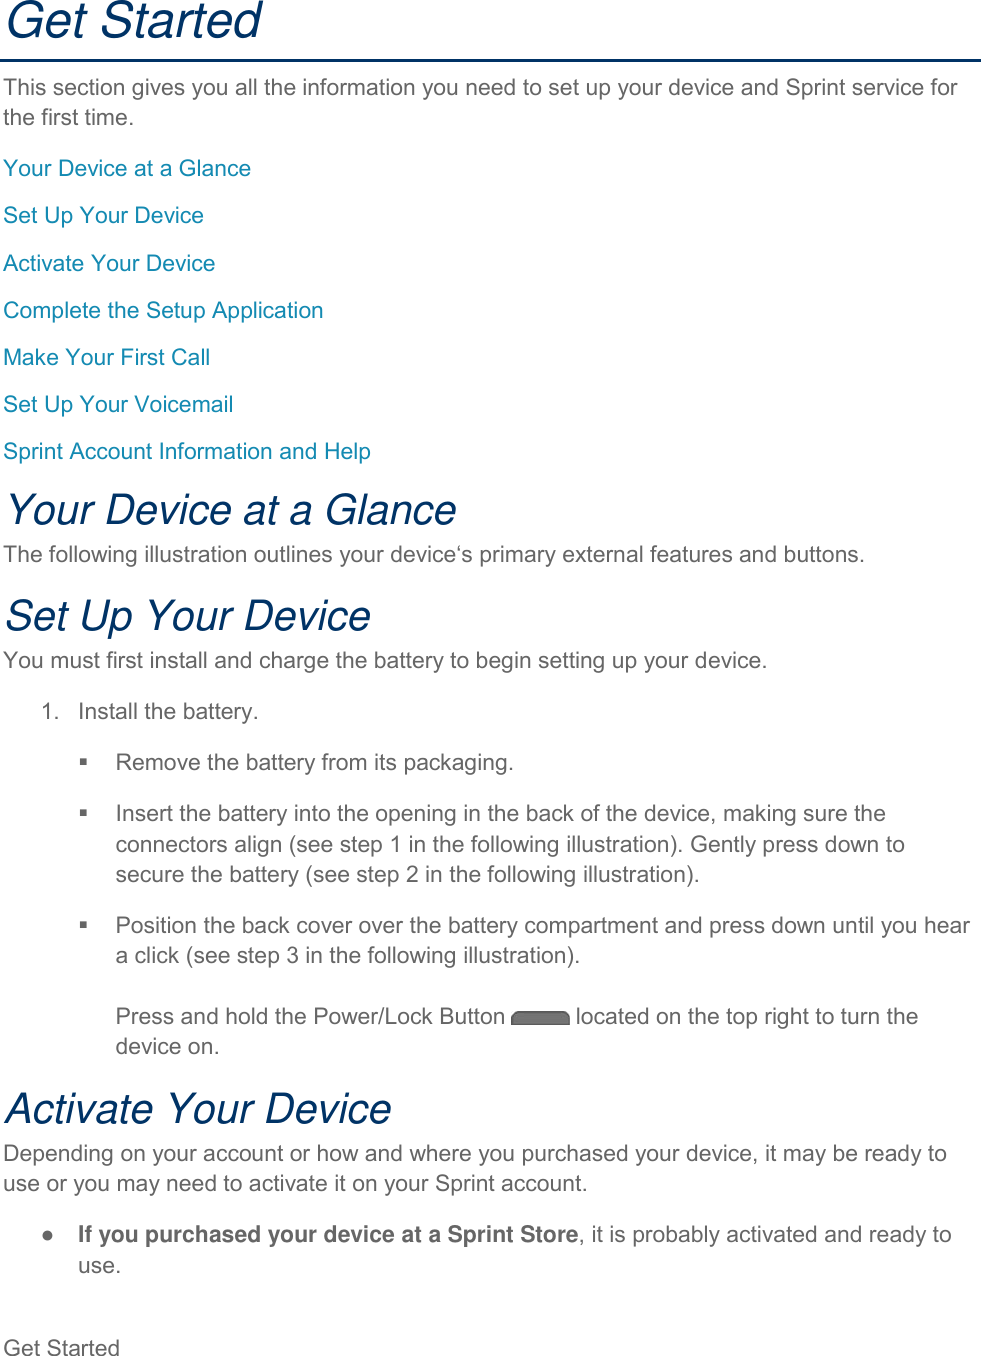 Get Started   Get Started This section gives you all the information you need to set up your device and Sprint service for the first time. Your Device at a Glance Set Up Your Device Activate Your Device Complete the Setup Application Make Your First Call Set Up Your Voicemail Sprint Account Information and Help Your Device at a Glance The following illustration outlines your device‘s primary external features and buttons. Set Up Your Device You must first install and charge the battery to begin setting up your device. 1.  Install the battery.   Remove the battery from its packaging.   Insert the battery into the opening in the back of the device, making sure the connectors align (see step 1 in the following illustration). Gently press down to secure the battery (see step 2 in the following illustration).   Position the back cover over the battery compartment and press down until you hear a click (see step 3 in the following illustration).  Press and hold the Power/Lock Button   located on the top right to turn the device on. Activate Your Device Depending on your account or how and where you purchased your device, it may be ready to use or you may need to activate it on your Sprint account. ●  If you purchased your device at a Sprint Store, it is probably activated and ready to use. 